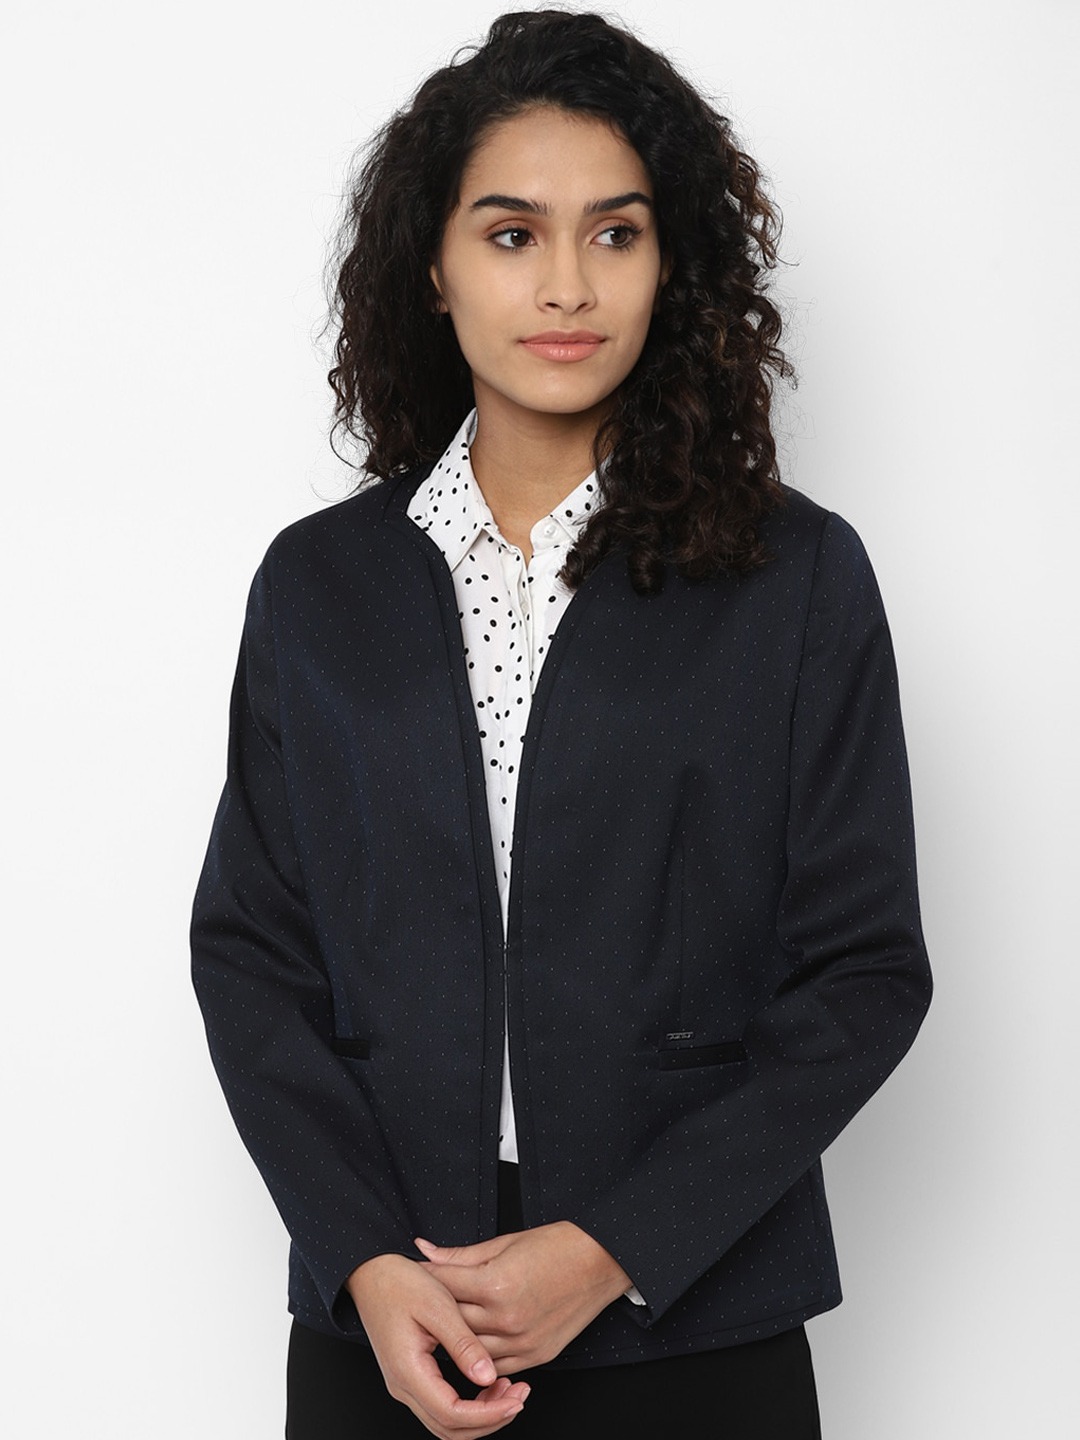 Clothing Blazers | Allen Solly Woman Women Navy Blue & White Printed Collarless Single-Breasted Formal Blazer - OH20627